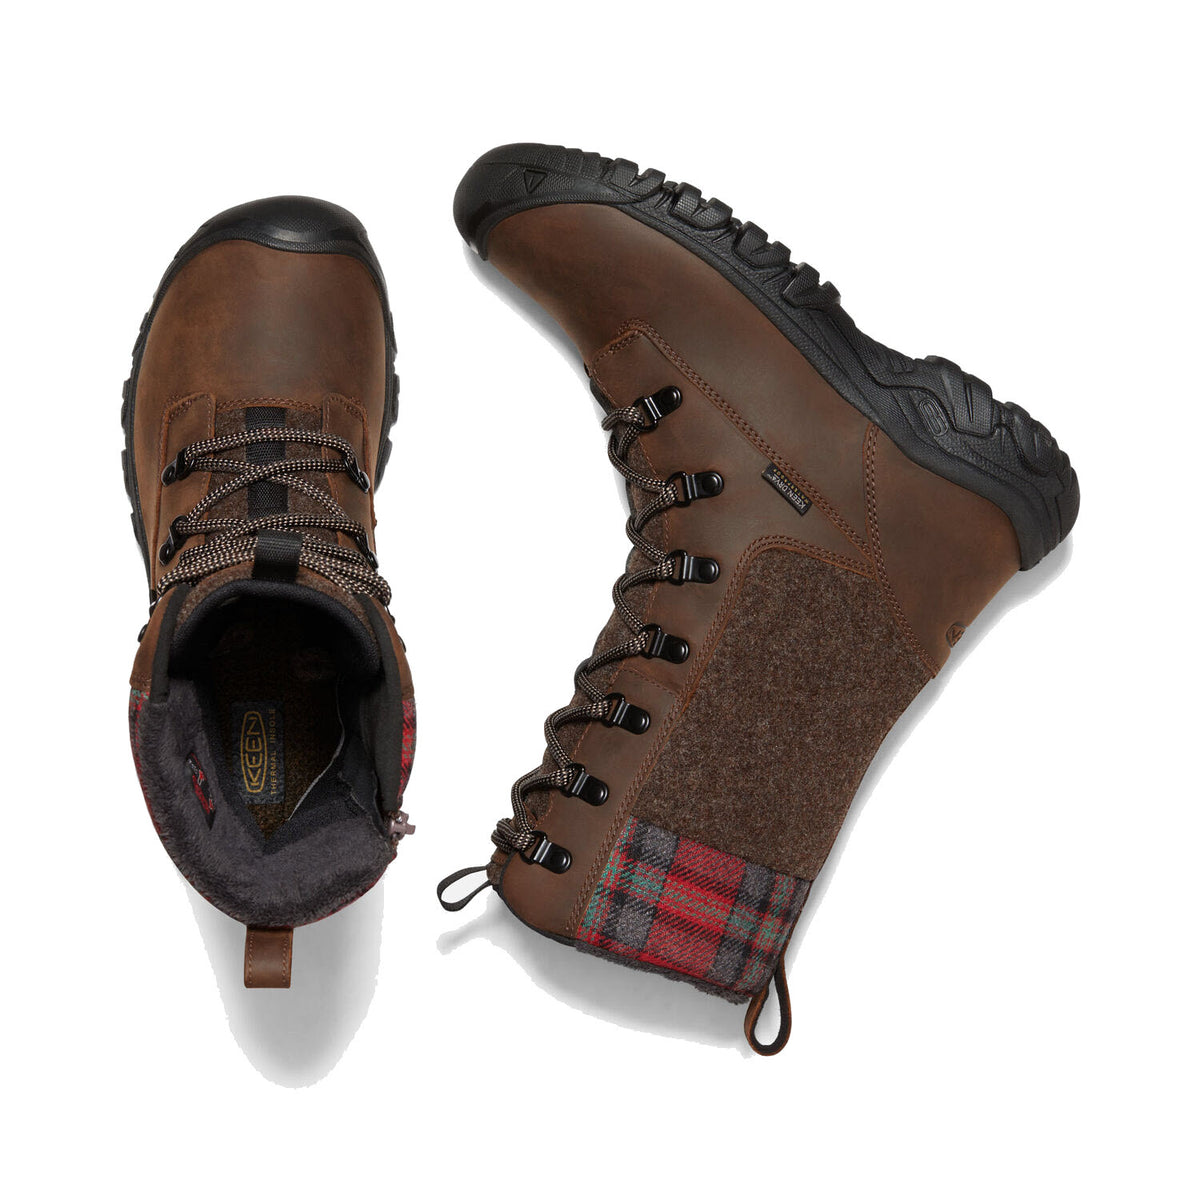 A pair of KEEN GRETA TALL BOOT BROWN - WOMENS with KEEN.DRY membrane and plaid detailing, viewed from above, isolated on a white background.